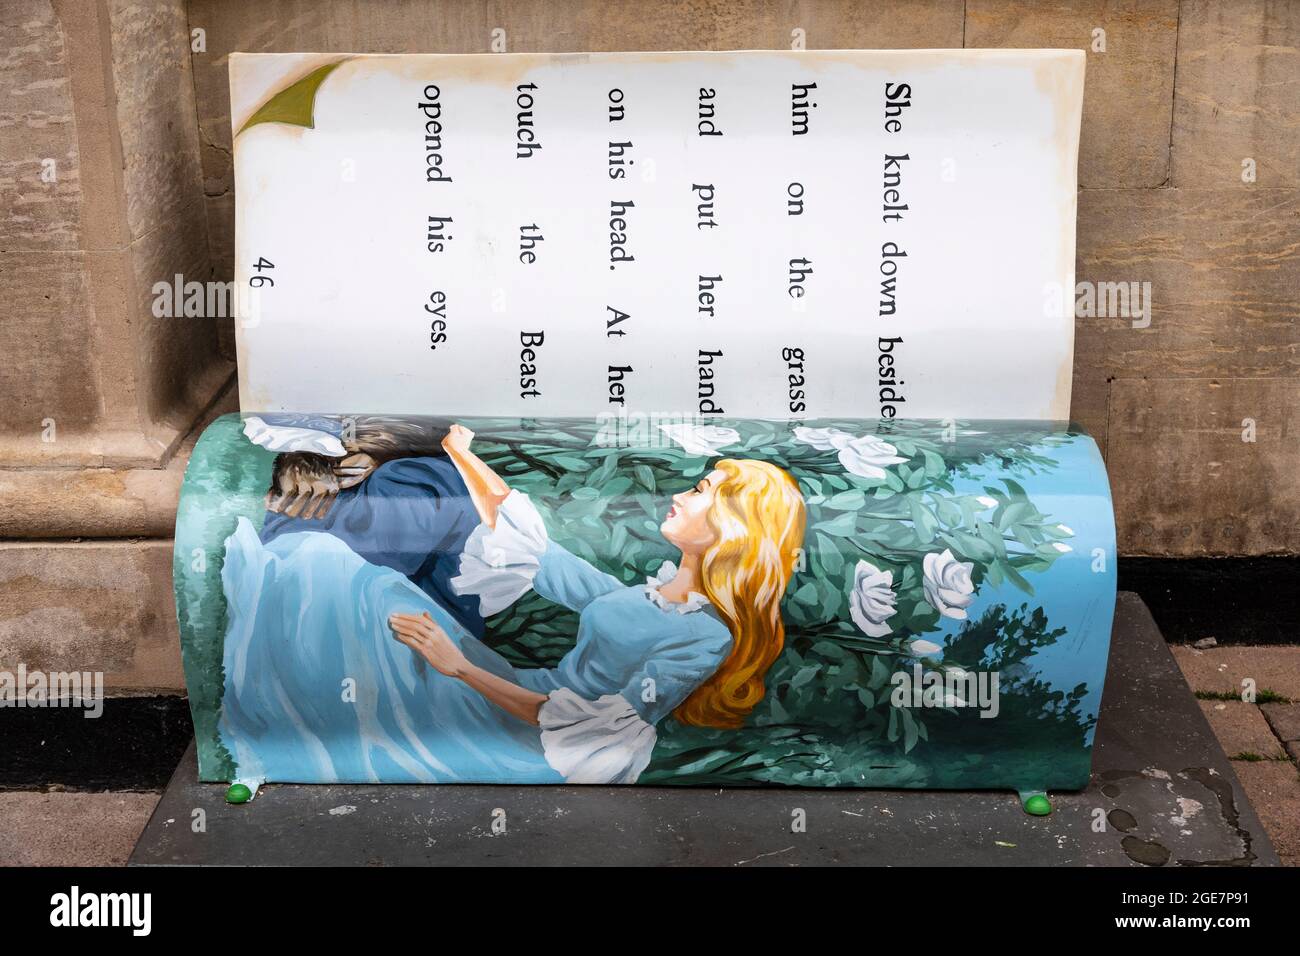 One of eight hand-painted BookBenches in Loughborough to celebrate 100 years of Ladybird Books. Stock Photo